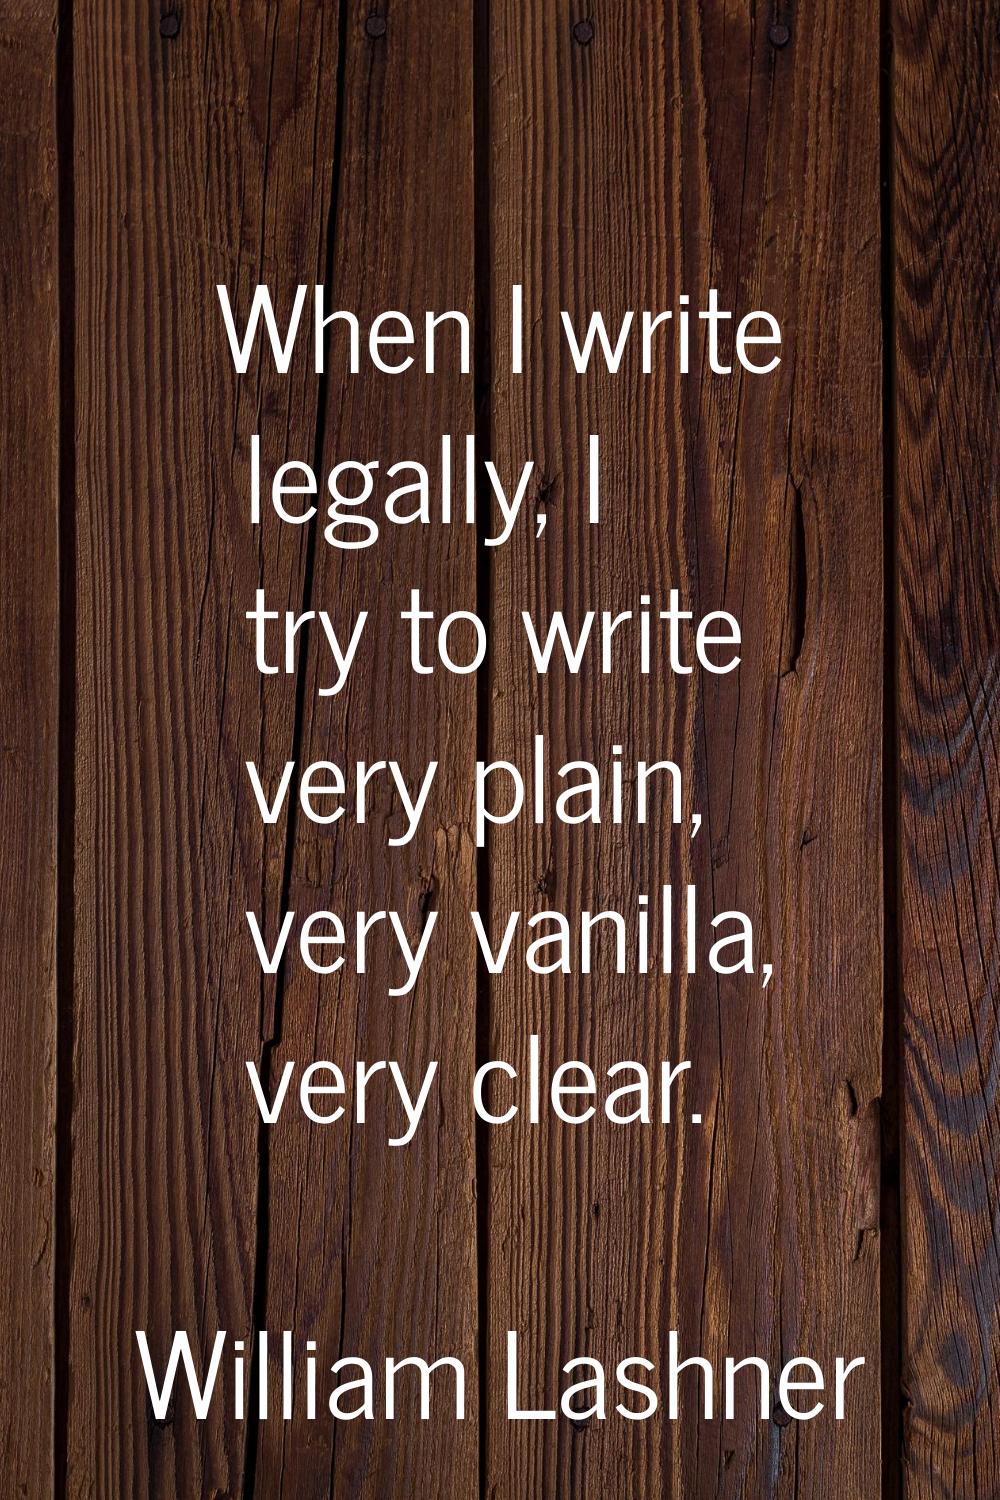 When I write legally, I try to write very plain, very vanilla, very clear.